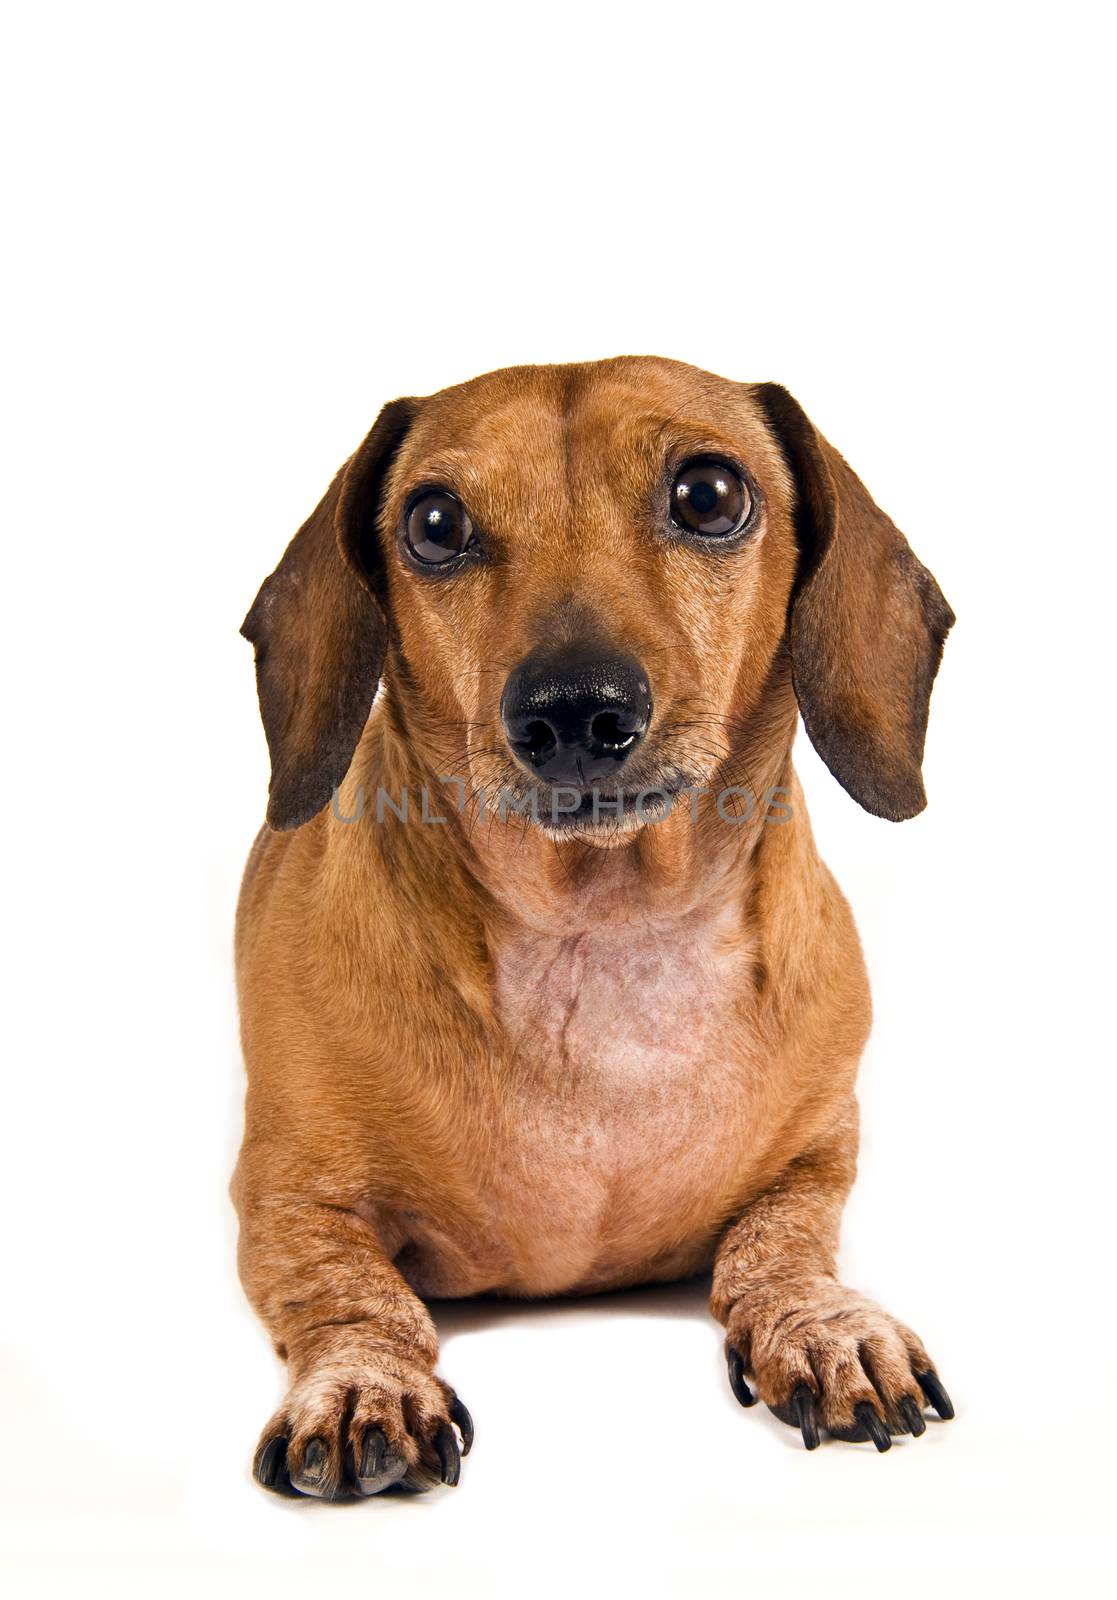 Little Dachshund Dog With Head Tilted by stockbuster1